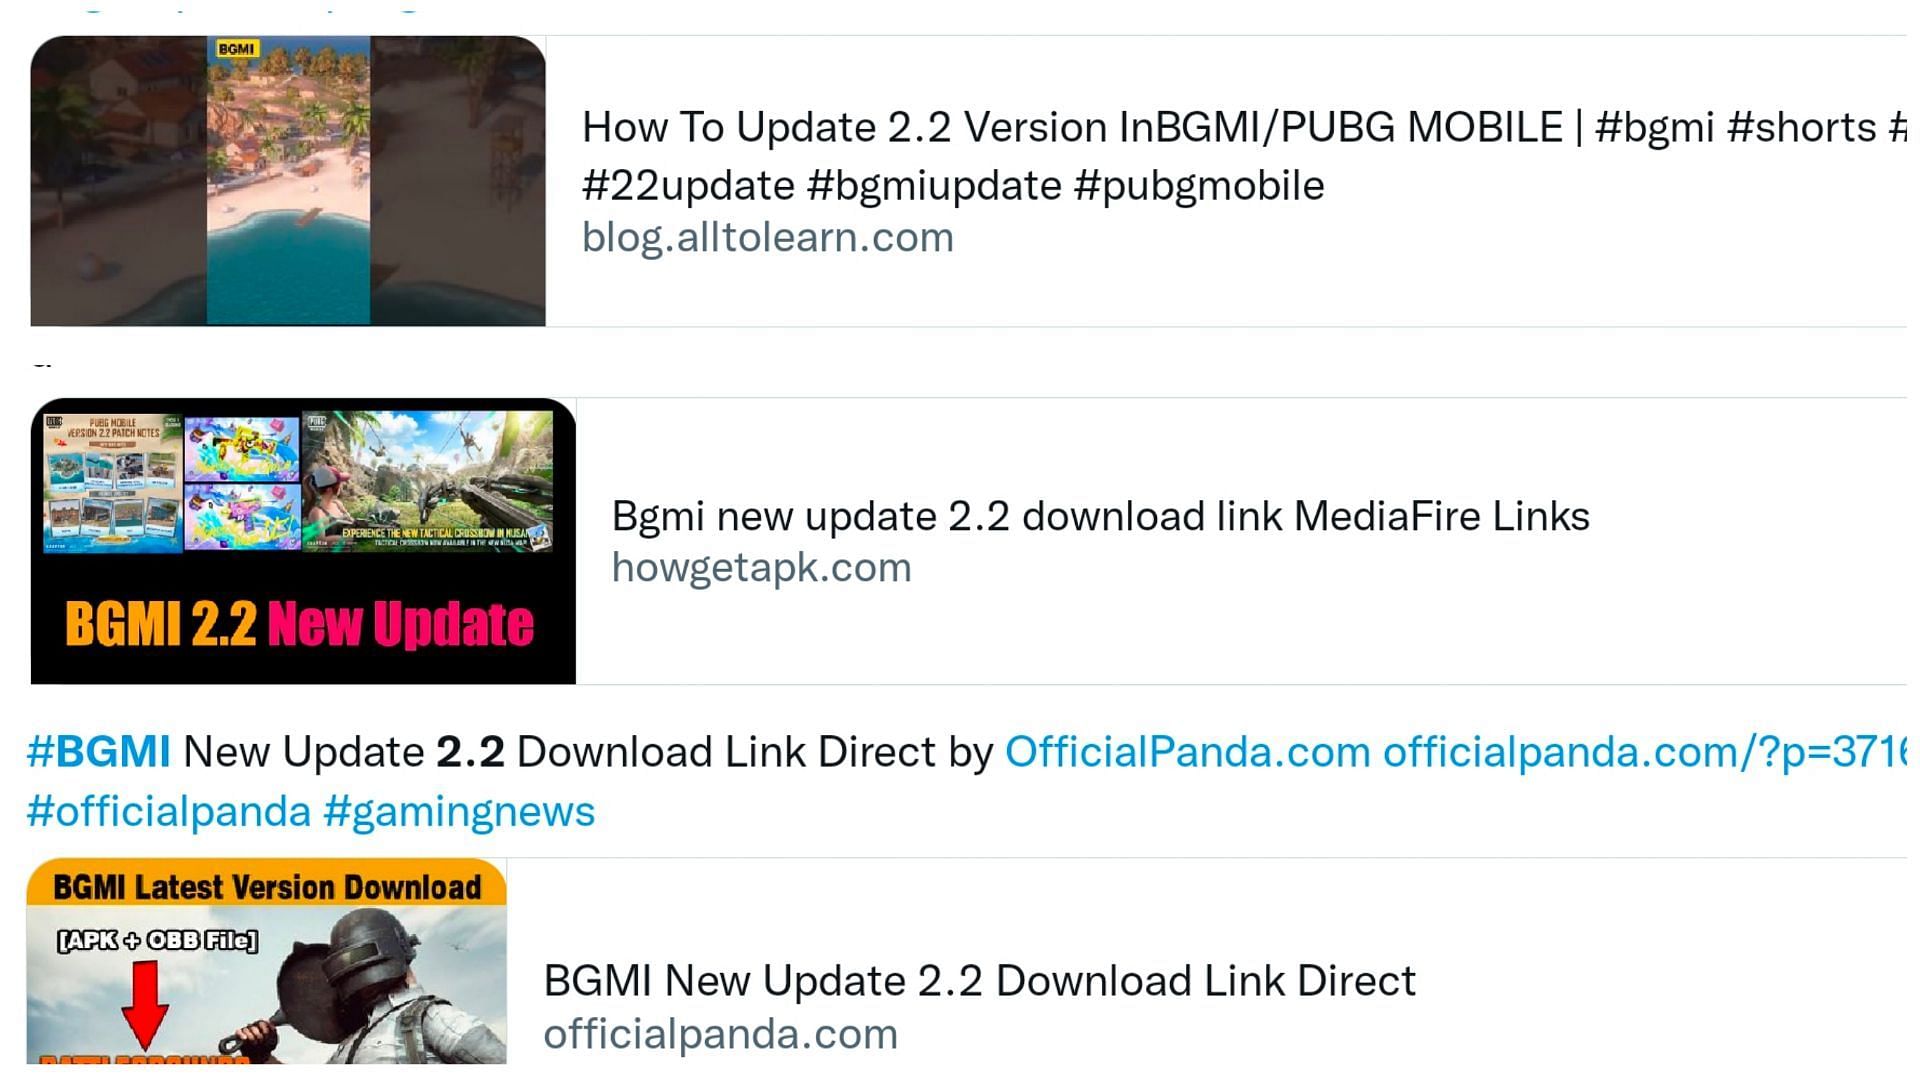 Avoid using any download links for Battlegrounds Mobile India 2.2 version update (Image via Twitter)